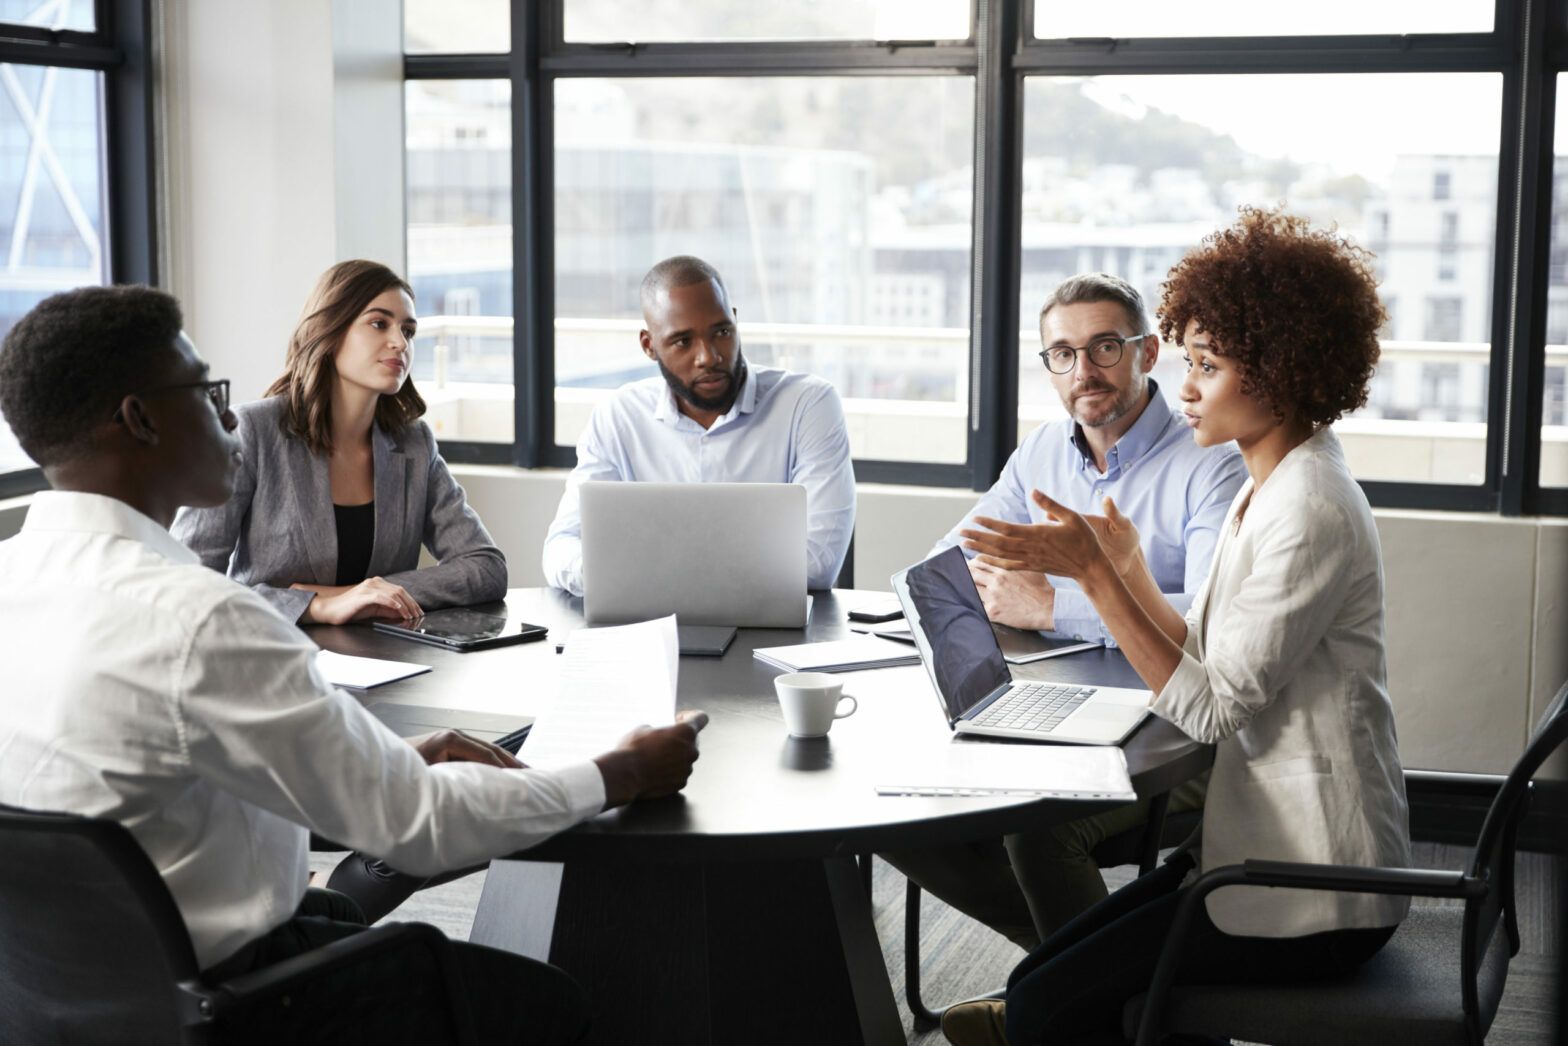 Ethnically diverse US boards perform better